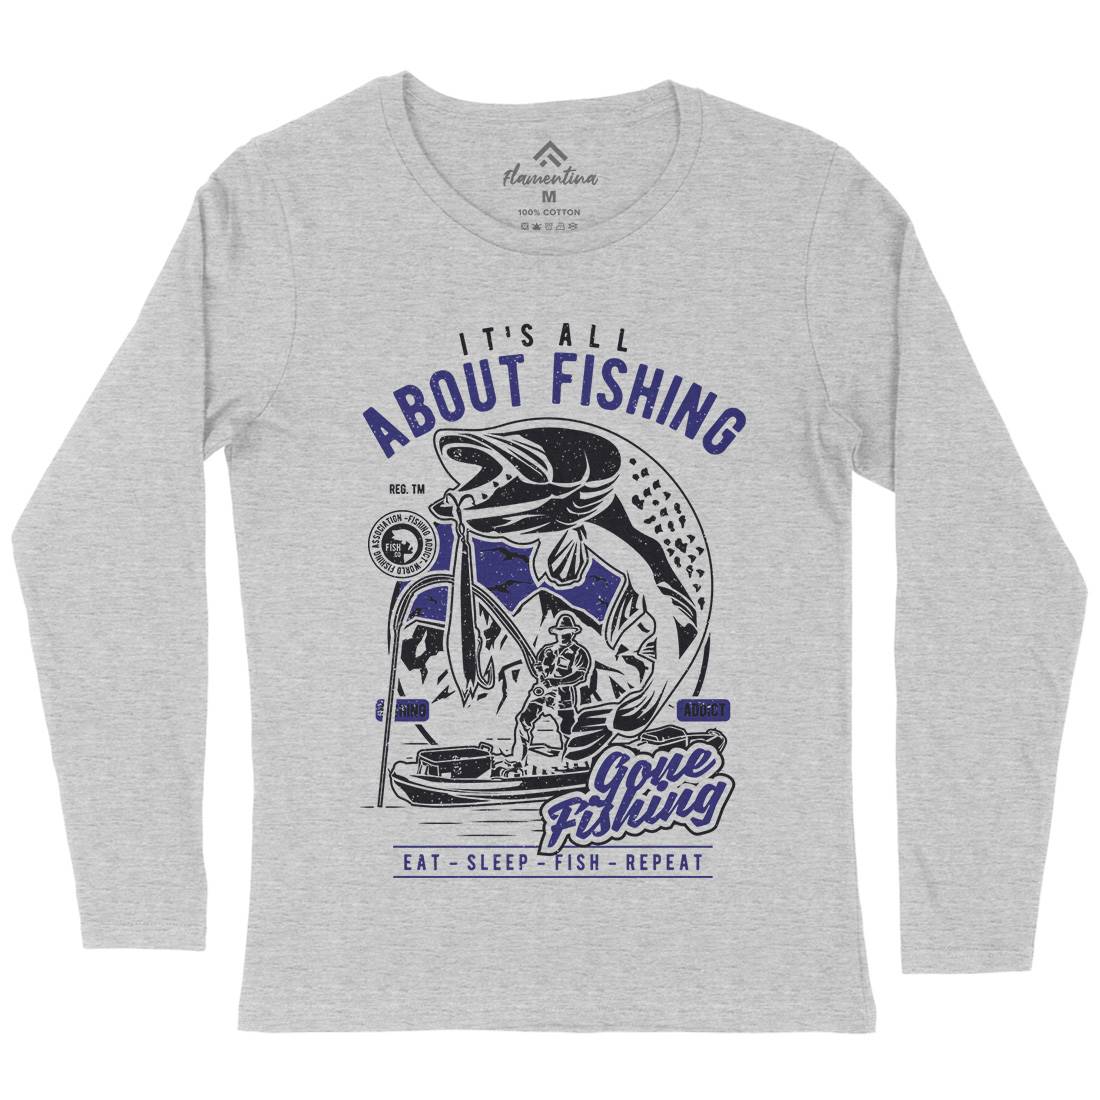 All About Womens Long Sleeve T-Shirt Fishing A604